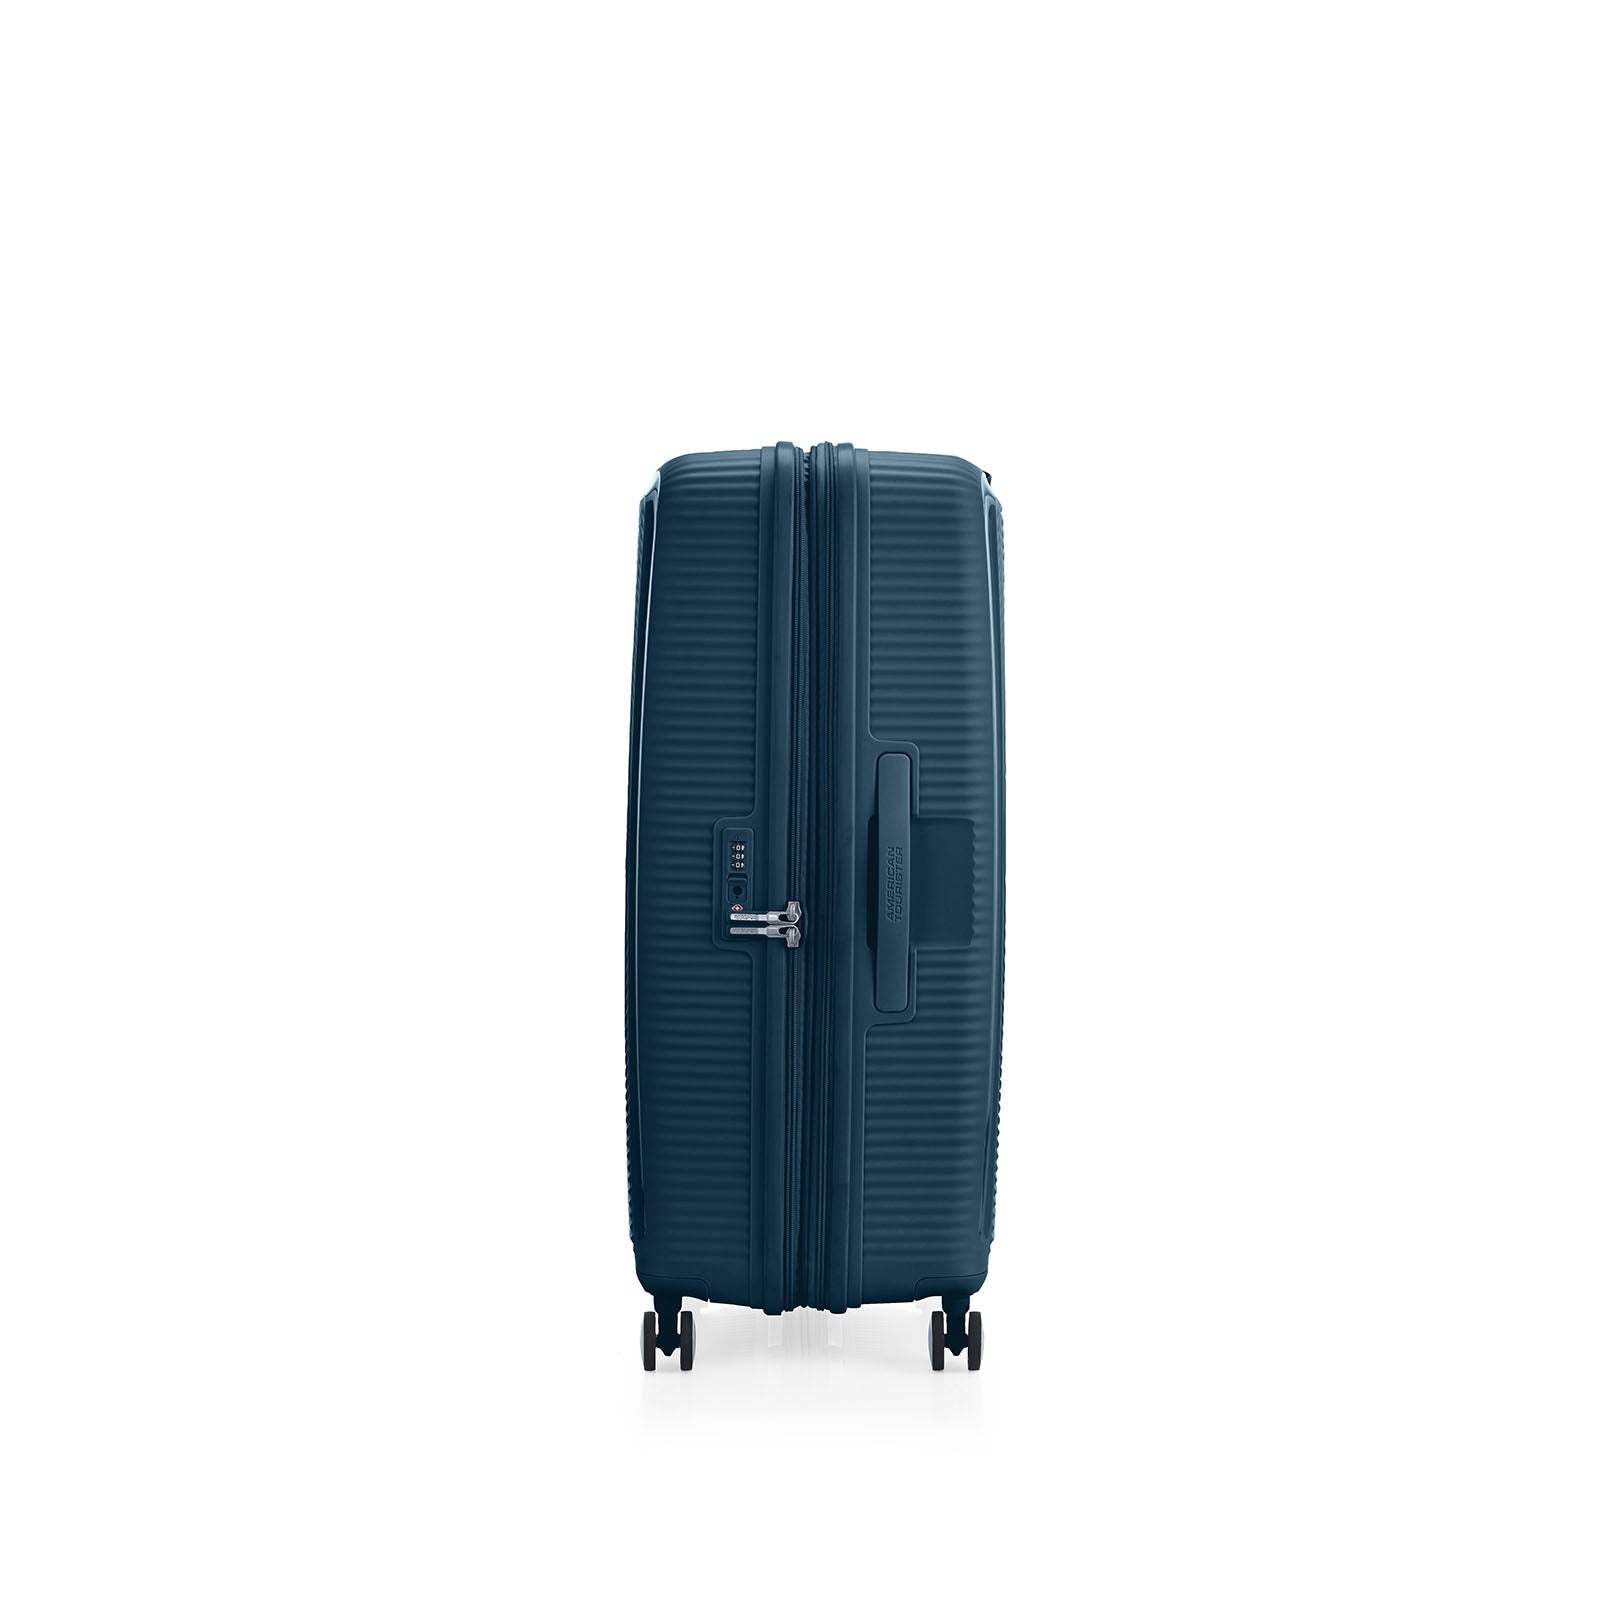 American-Tourister-Curio-2-80cm-Suitcase-Varisty-Green-Side-Handle